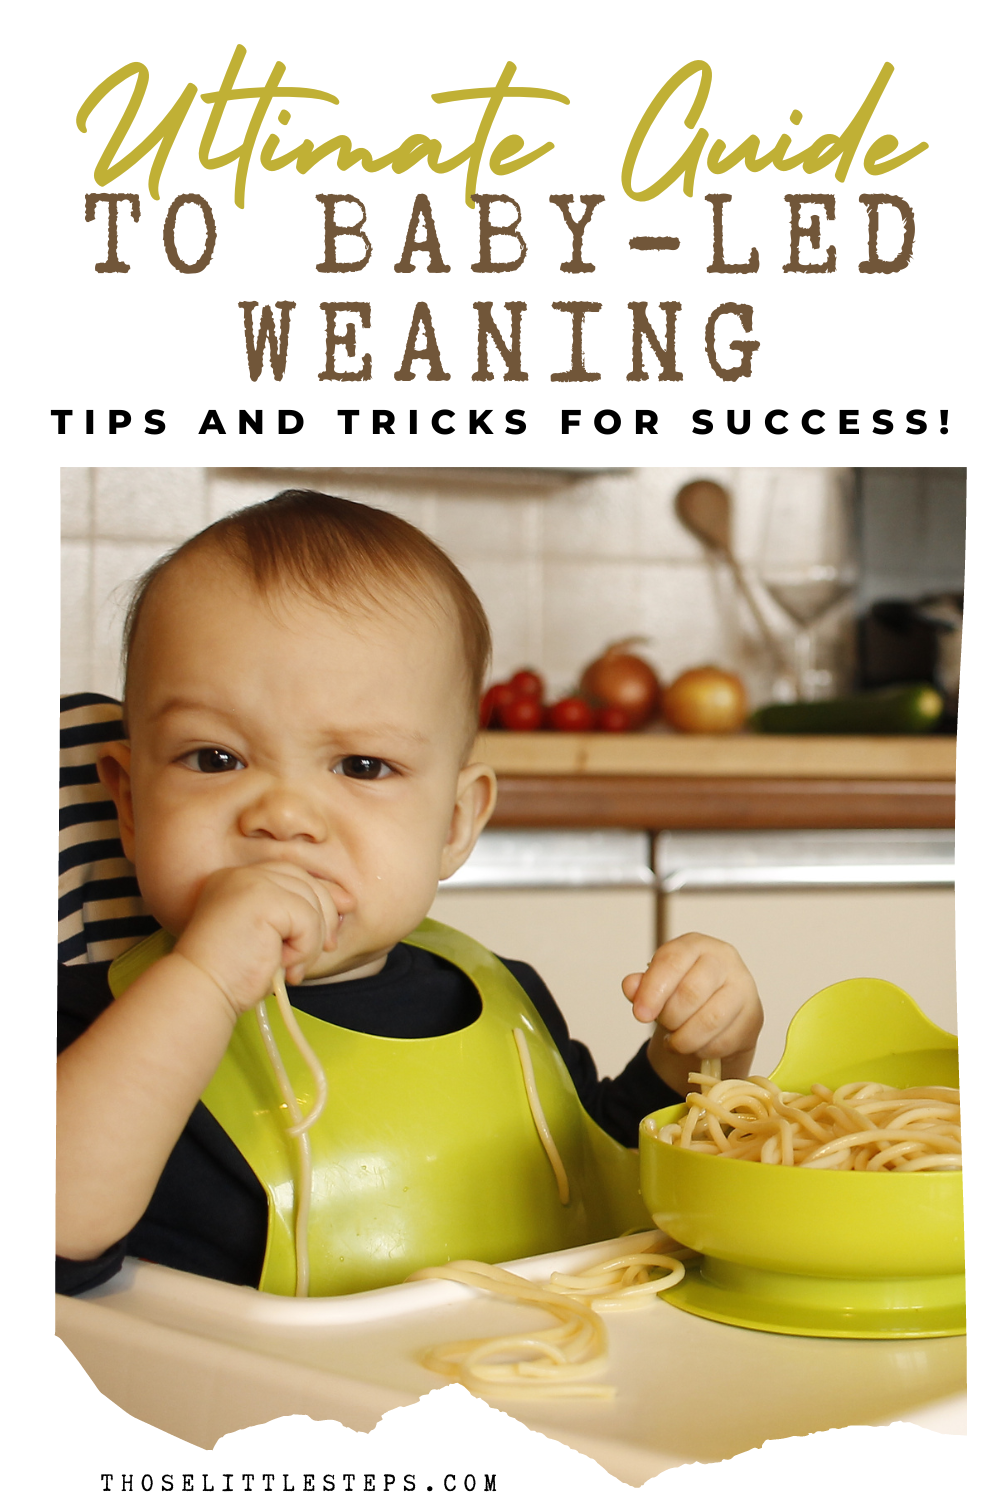 Everything You Need To Know About Baby-Led Weaning